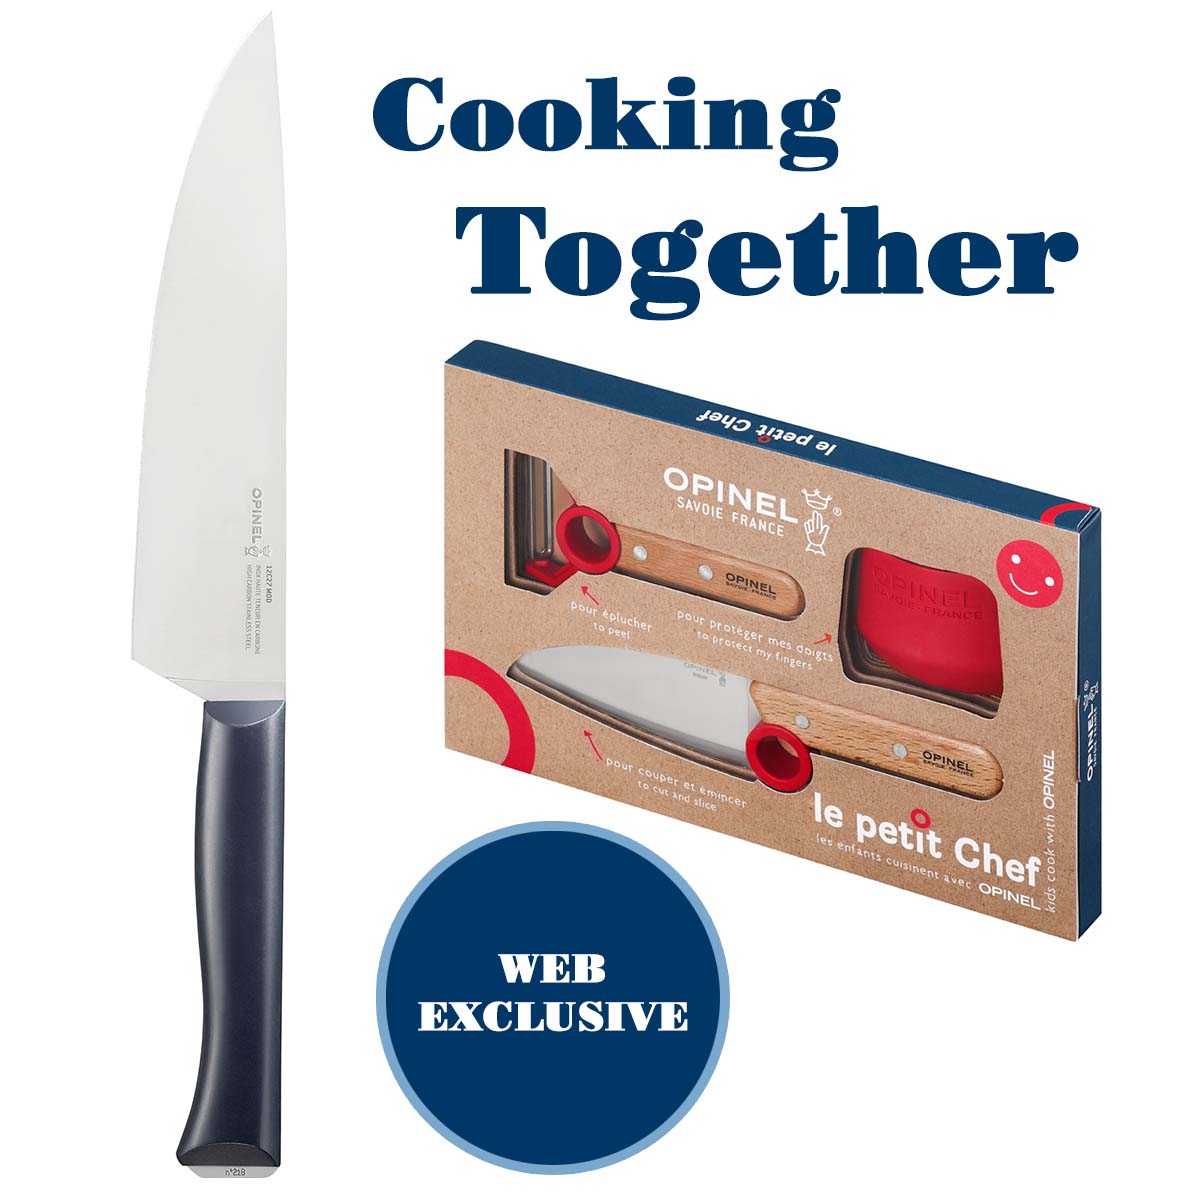 Our review of the Kitchellence knife - Healthy Kitchen 101